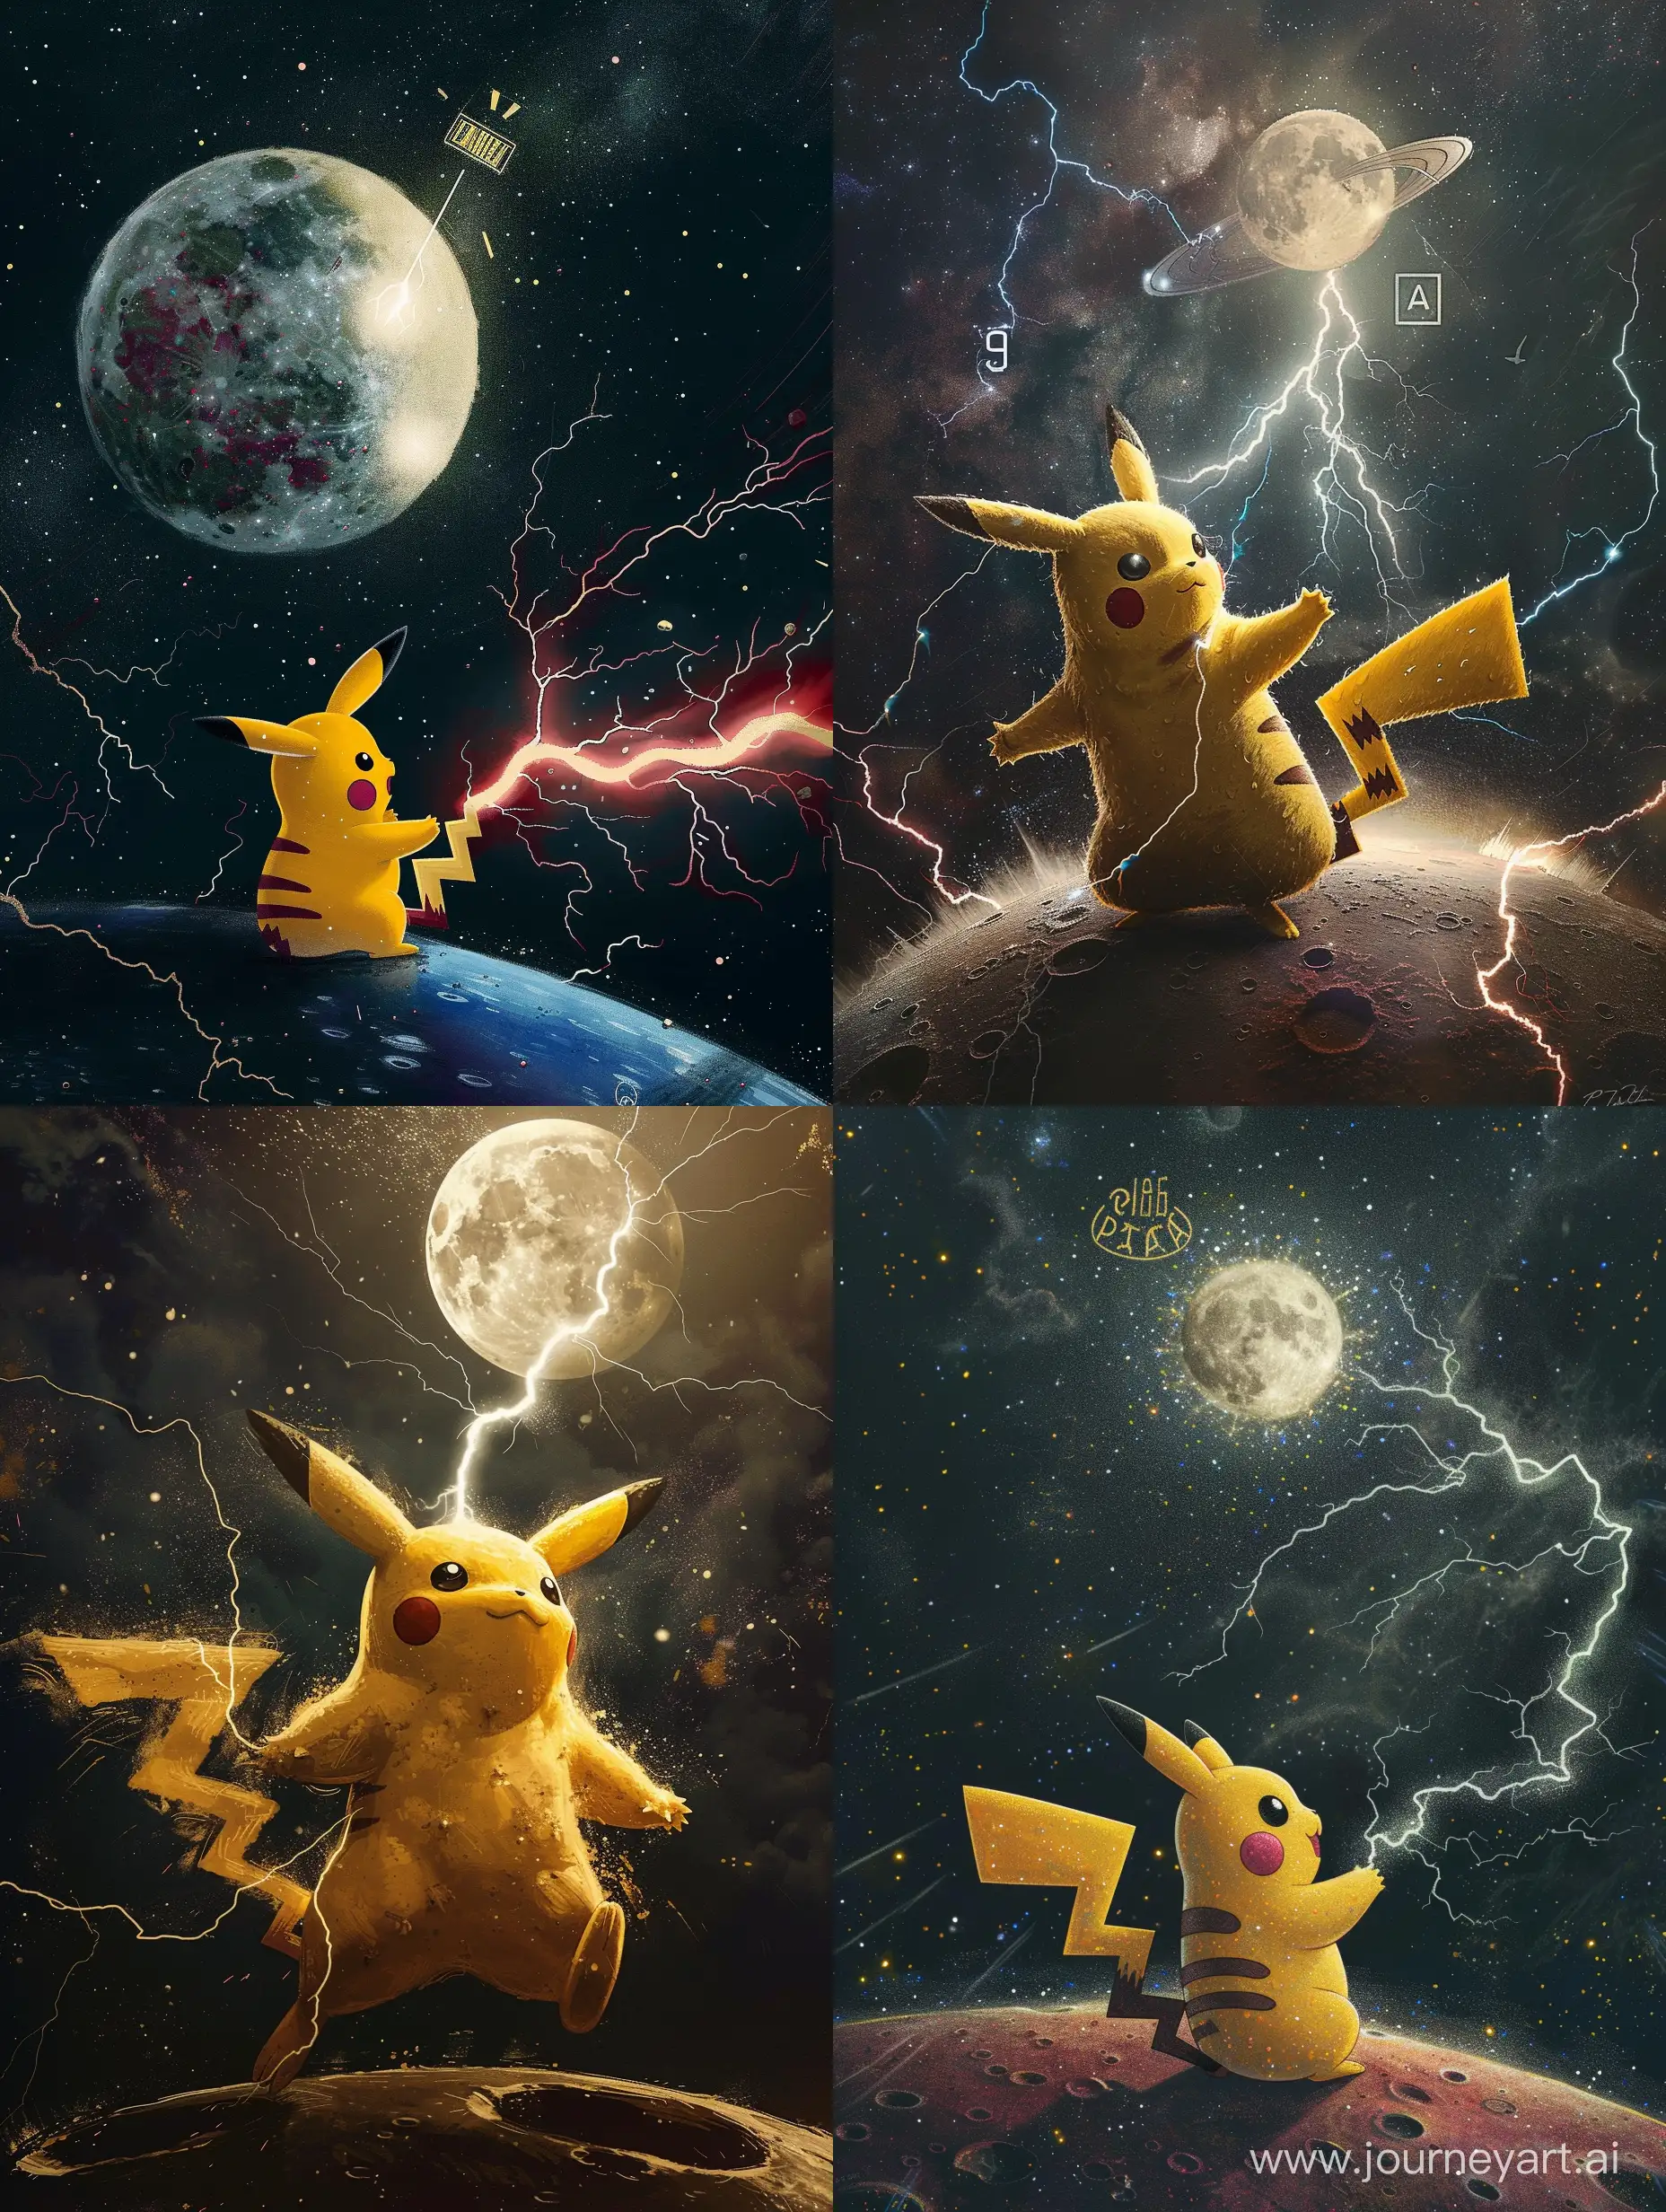 Pikachu-Shooting-Lightning-at-the-Moon-in-Marvel-Universe